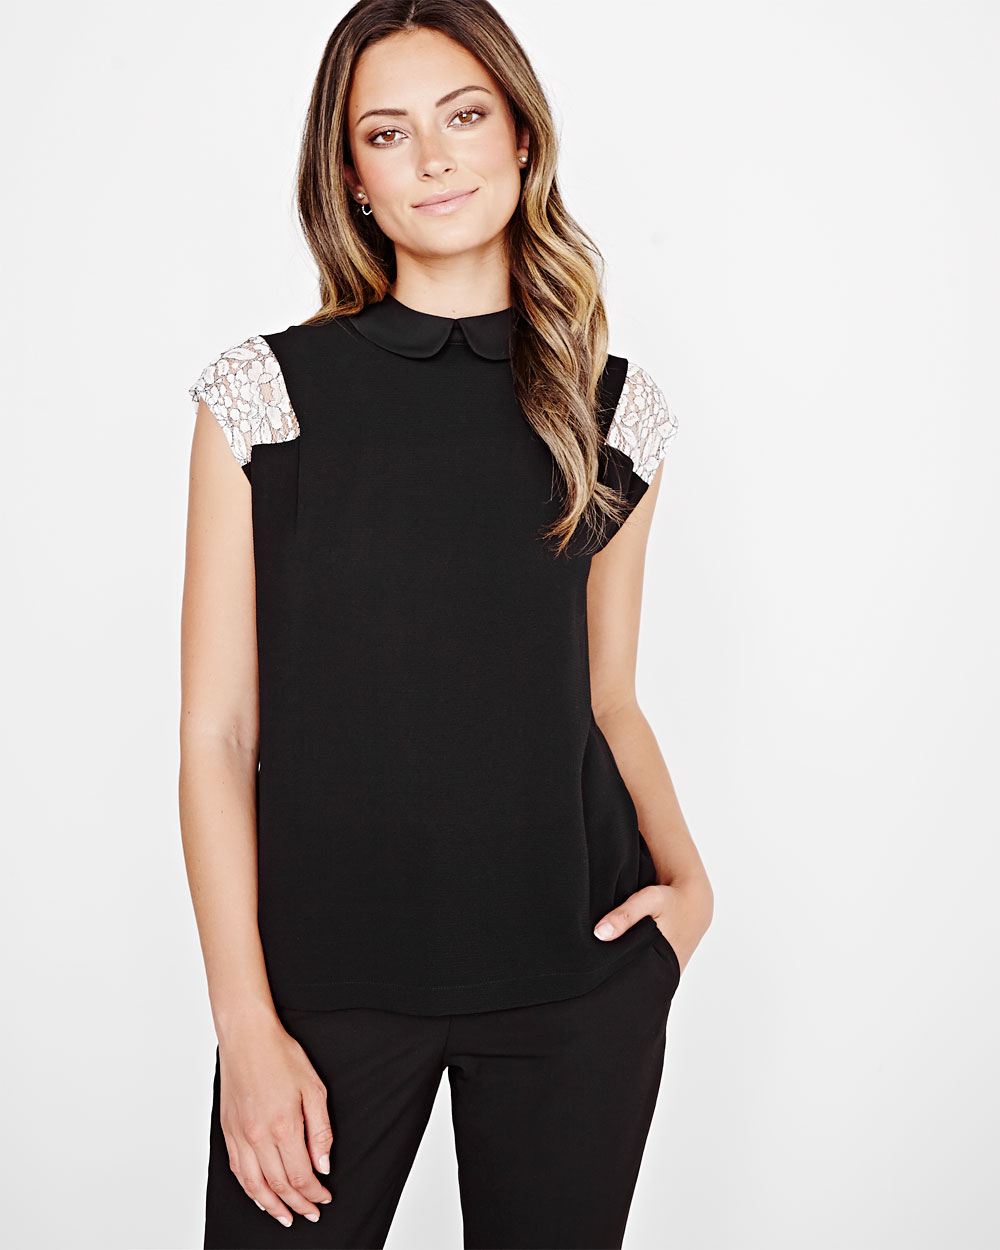 Lace sleeve t-shirt with collar | RW&CO.